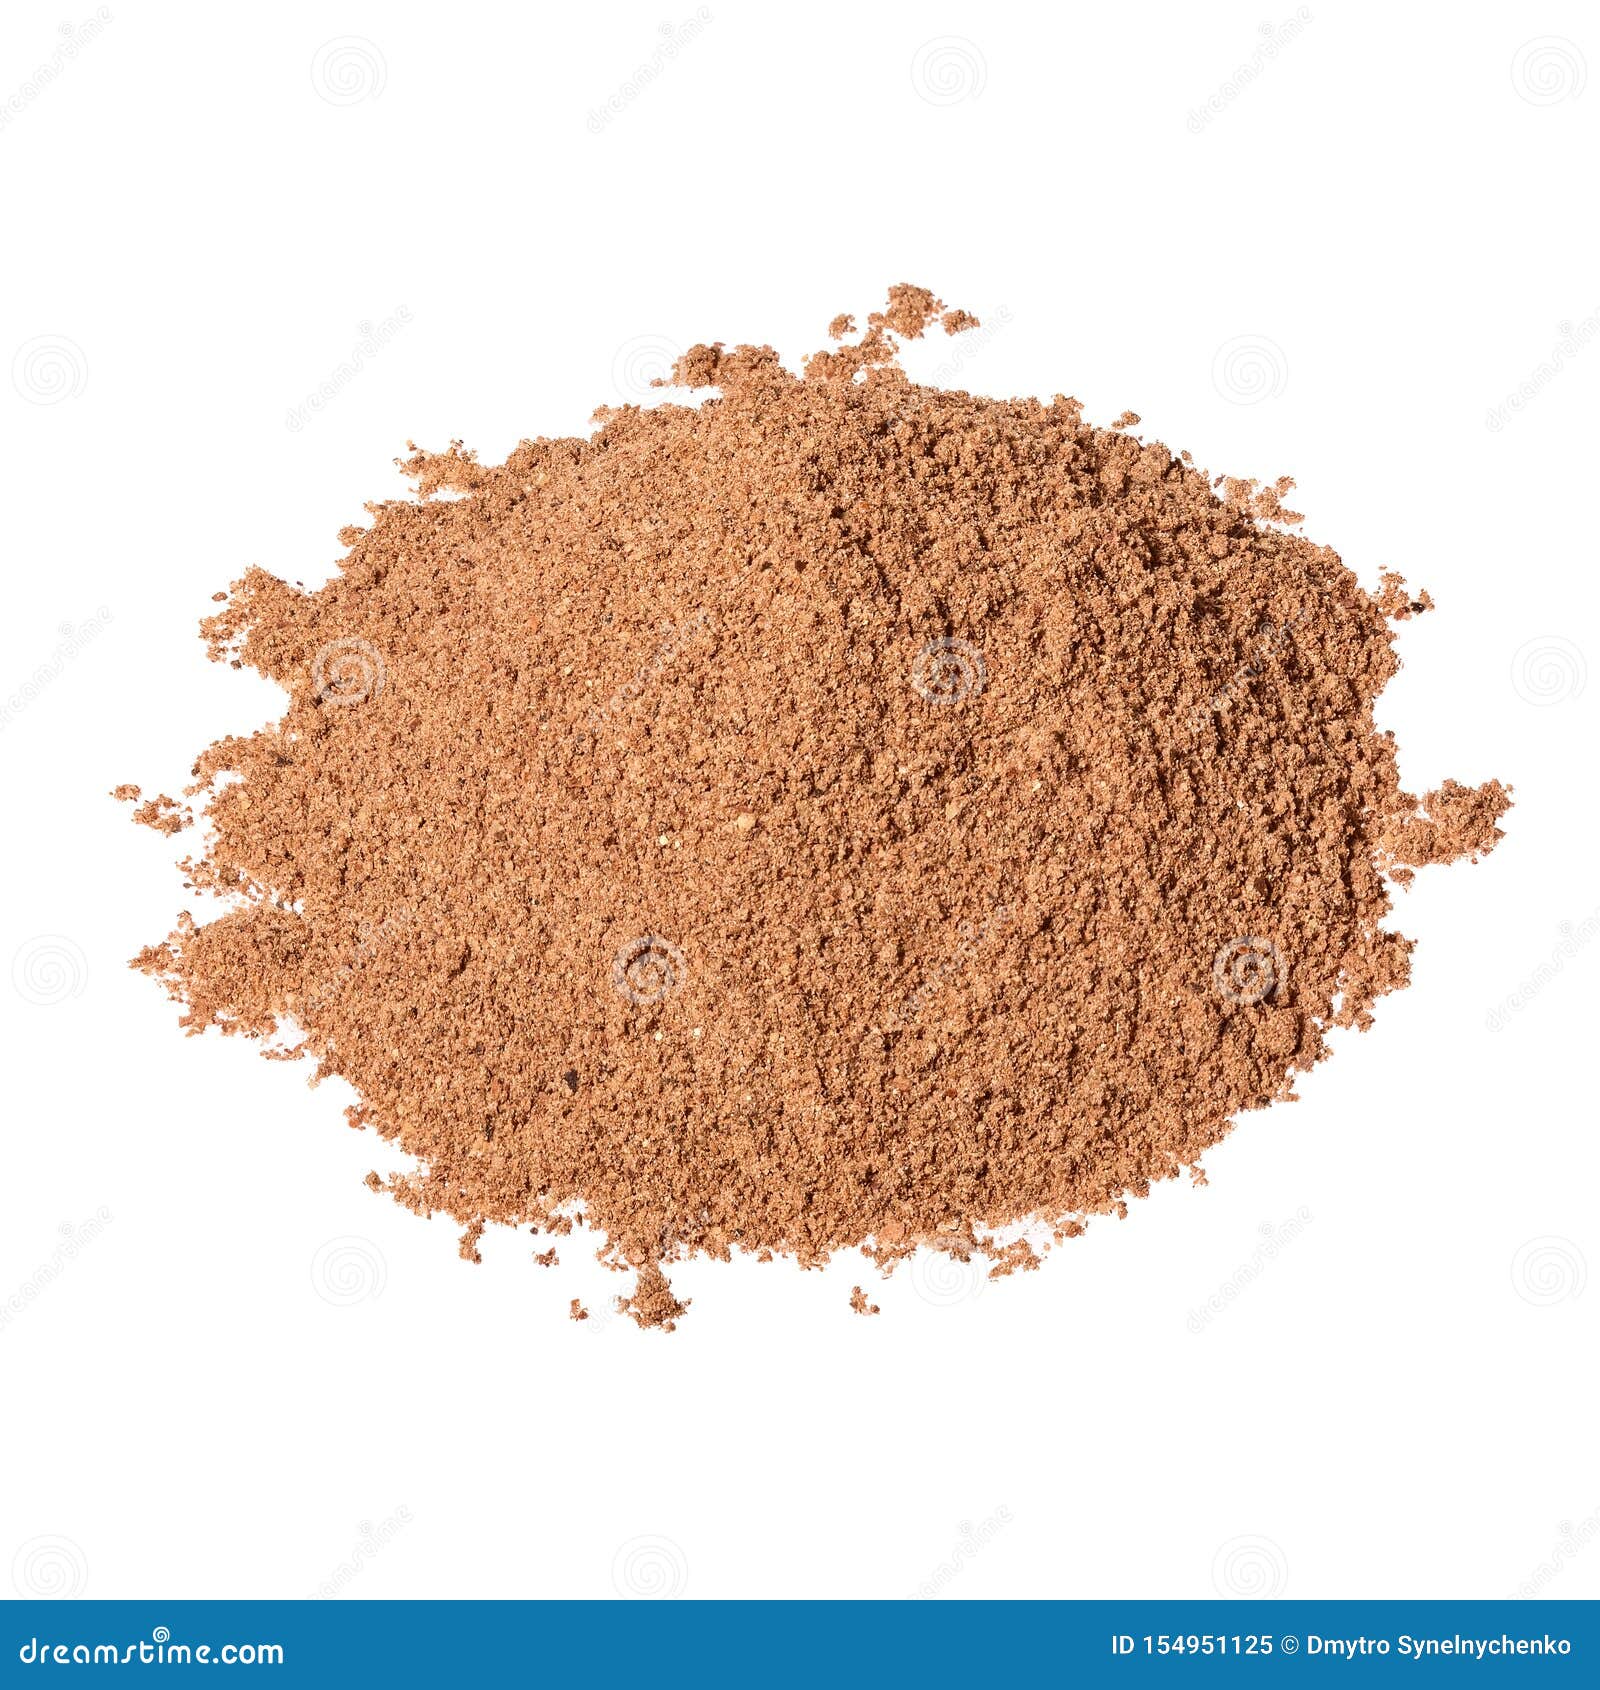 Pile Of Nutmeg Powder Isolated On White Background Used As A Spice In Many Sweet Dishes Stock Image Image Of Condiment Powder 154951125,Fire Belly Newt Habitat